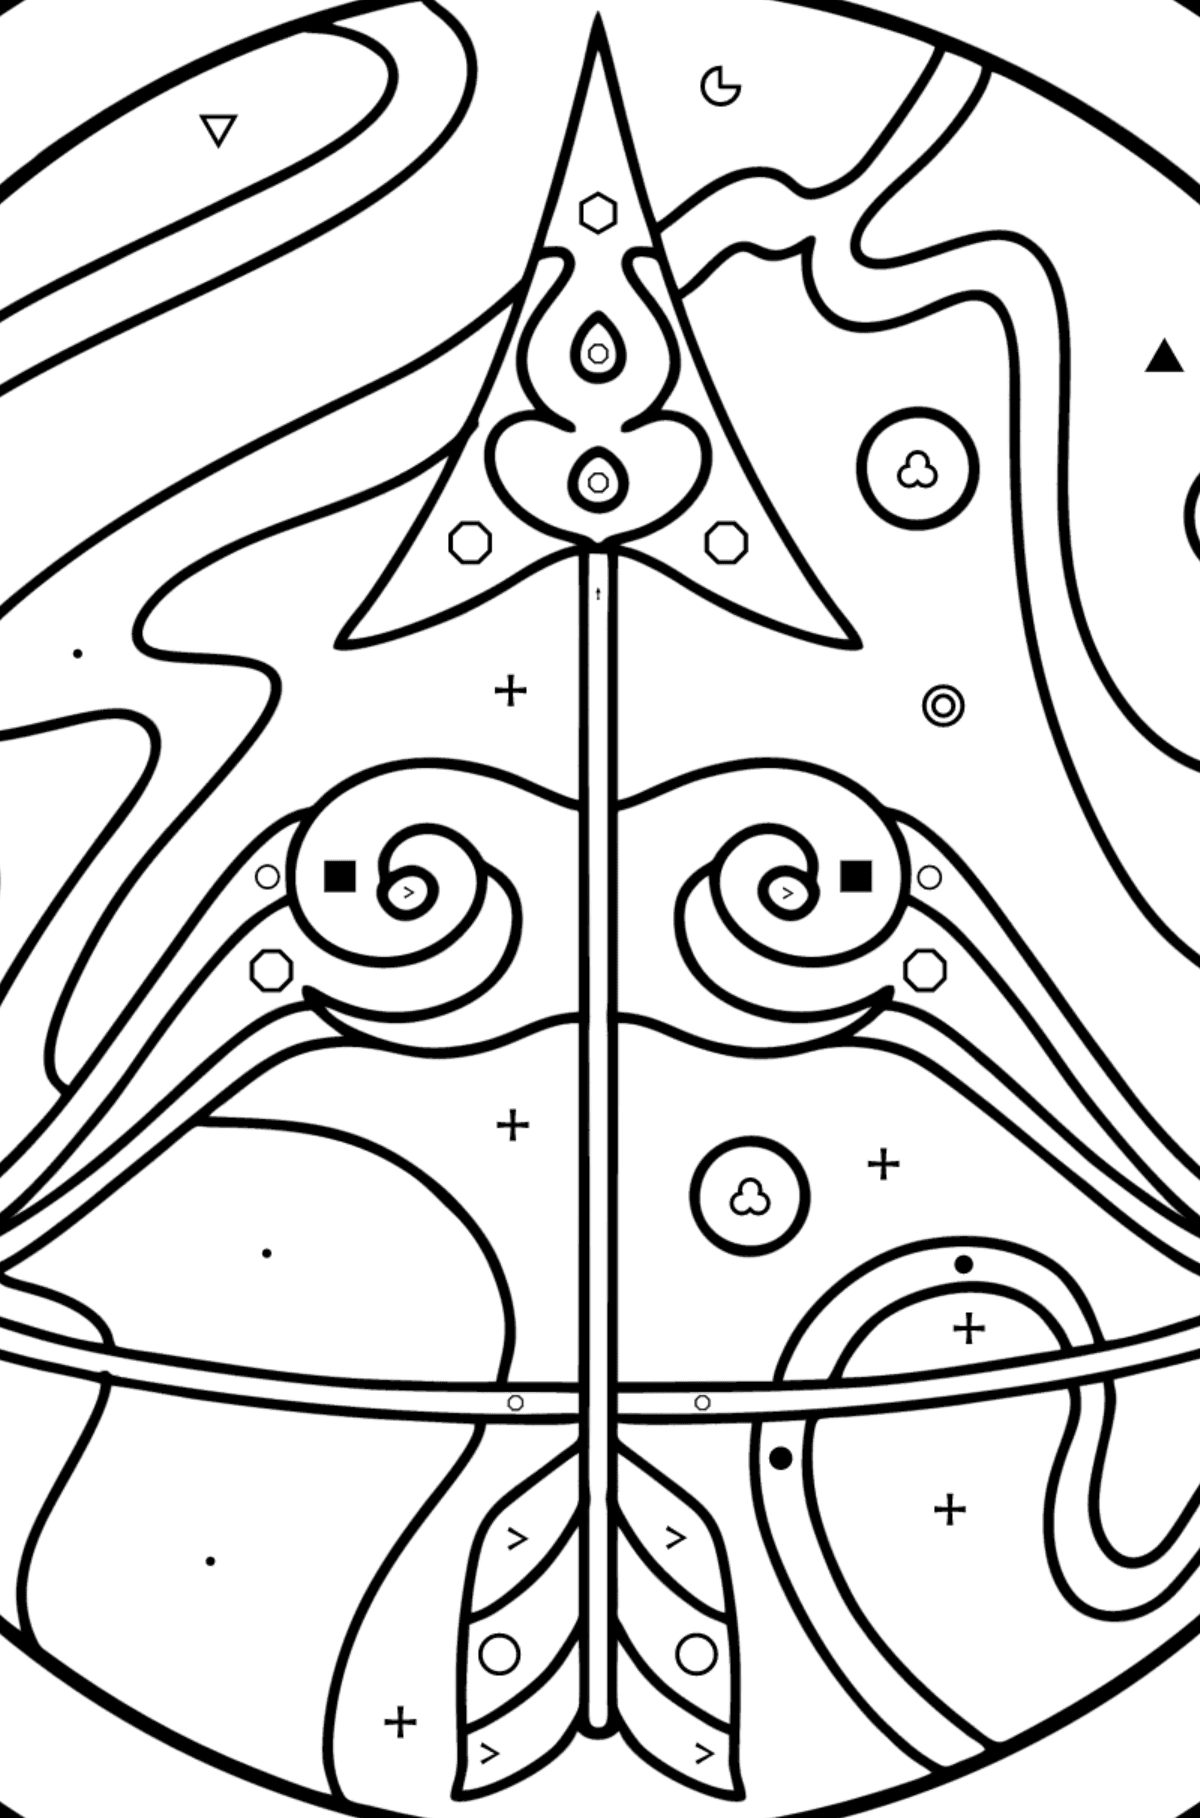 Coloring page for kids - zodiac sign Sagittarius - Coloring by Symbols and Geometric Shapes for Kids